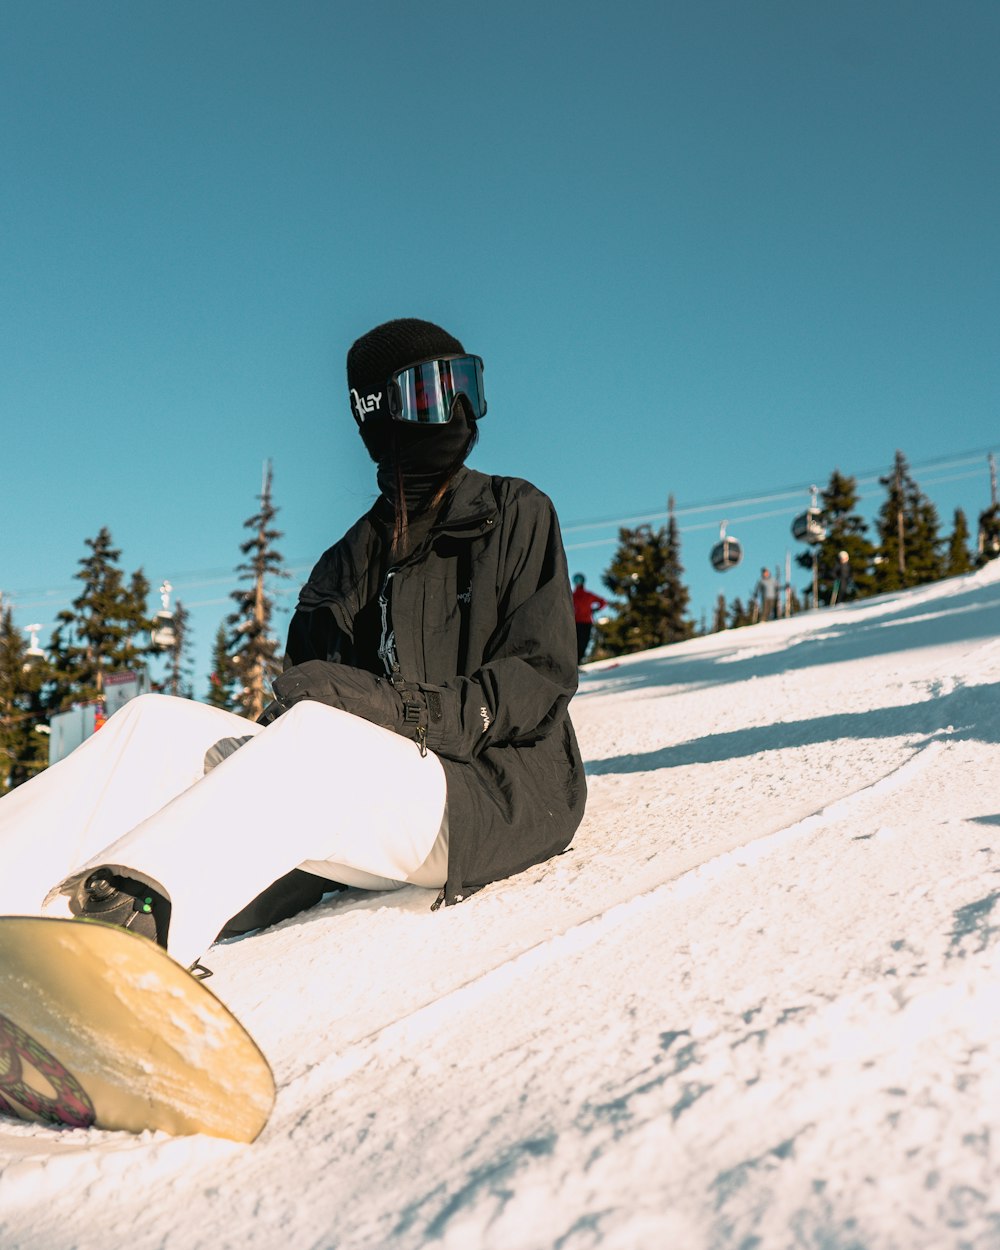 a snowboarder sitting on the snow with his board